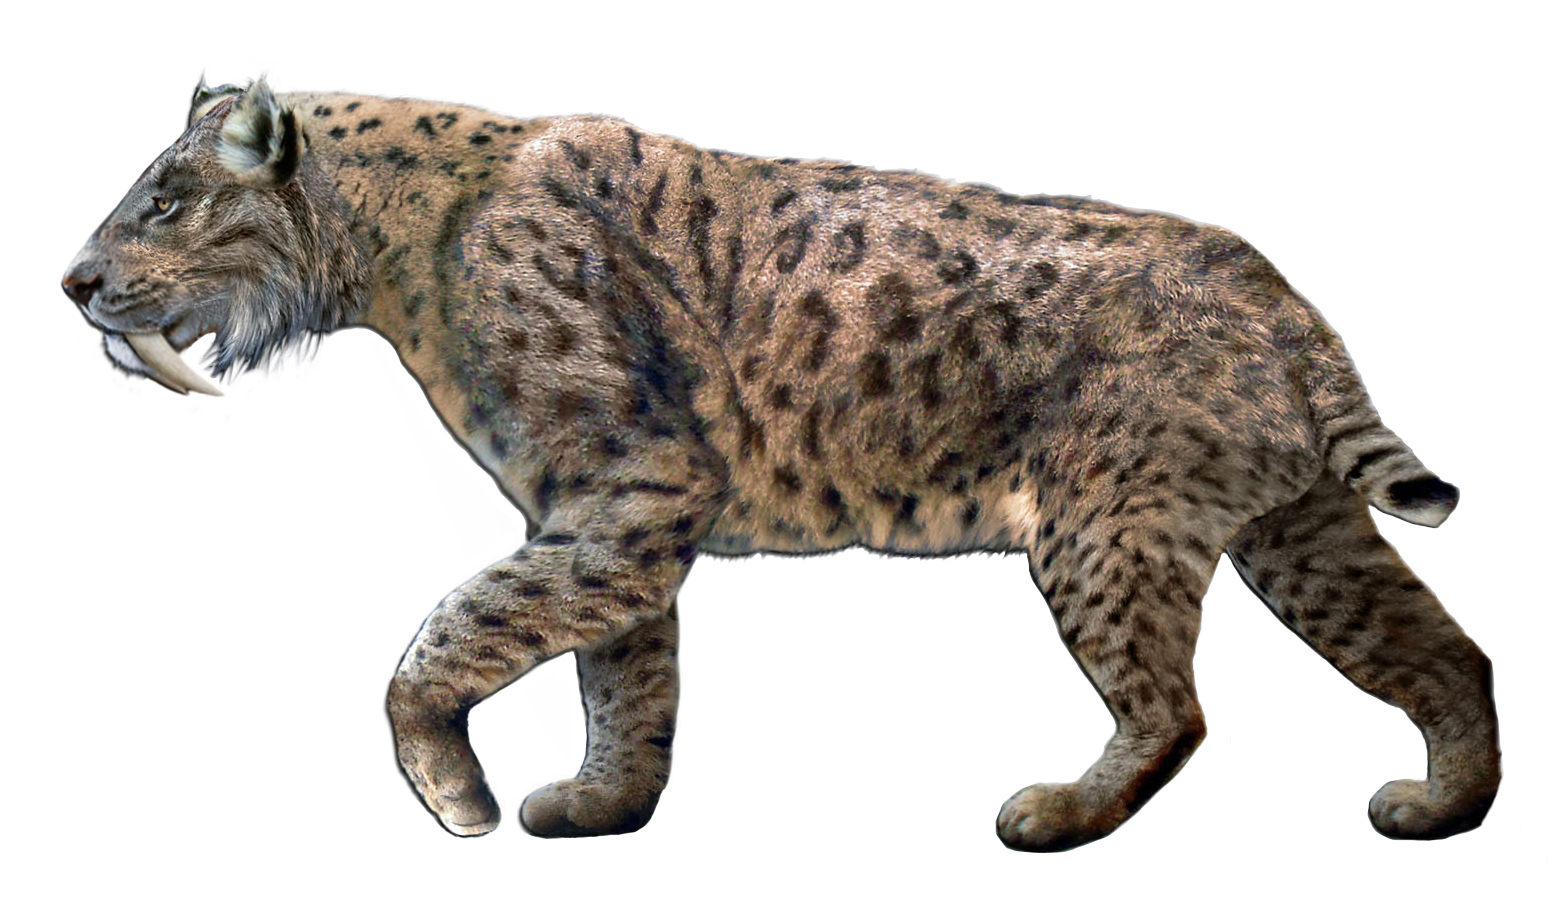 Illustration reconstructing a saber-toothed cat as it may have looked in like. The image shows a stout-bodied cat with a spotted tan coat, short tail, and long canine teeth.